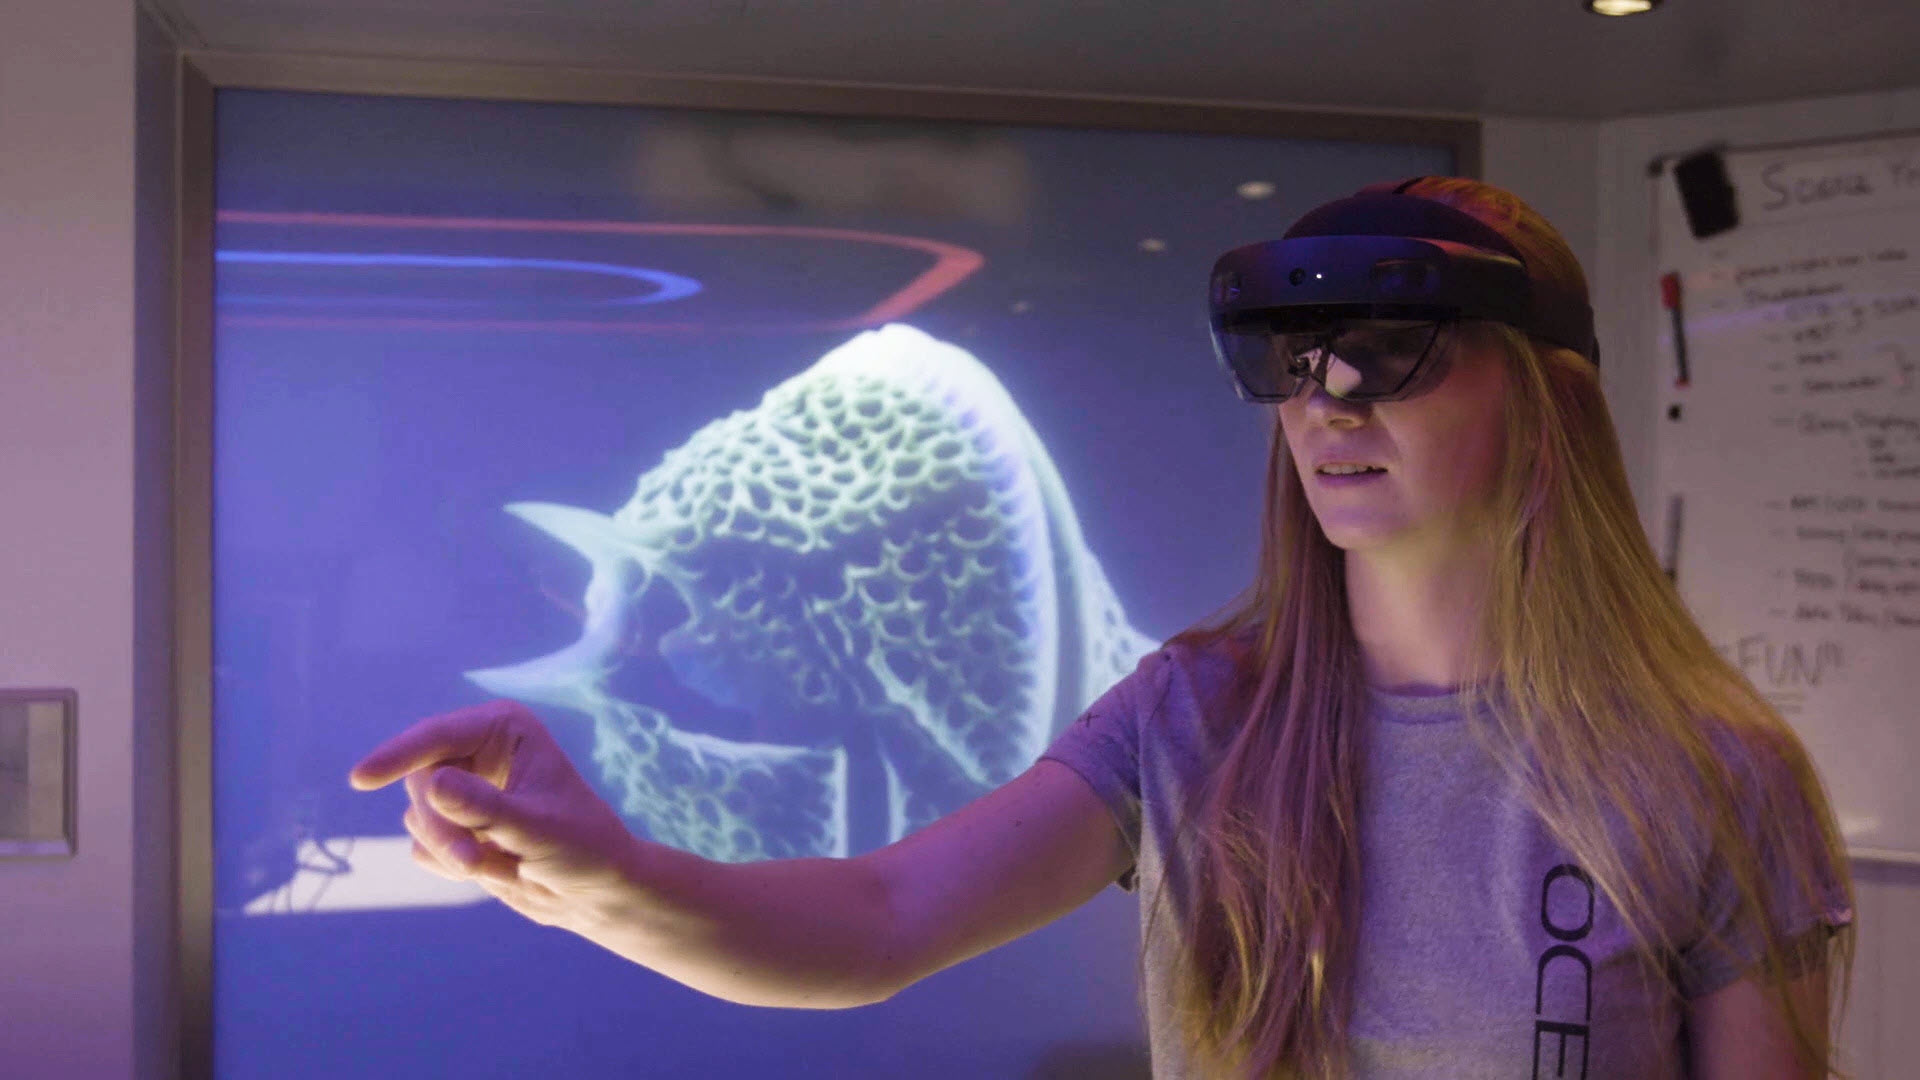 At Ignite, OceanX announced a new collaboration with Microsoft to create a Microsoft Mesh-enabled “holographic laboratory” on its research ship OceanXplorer. Image courtesy of OceanX.